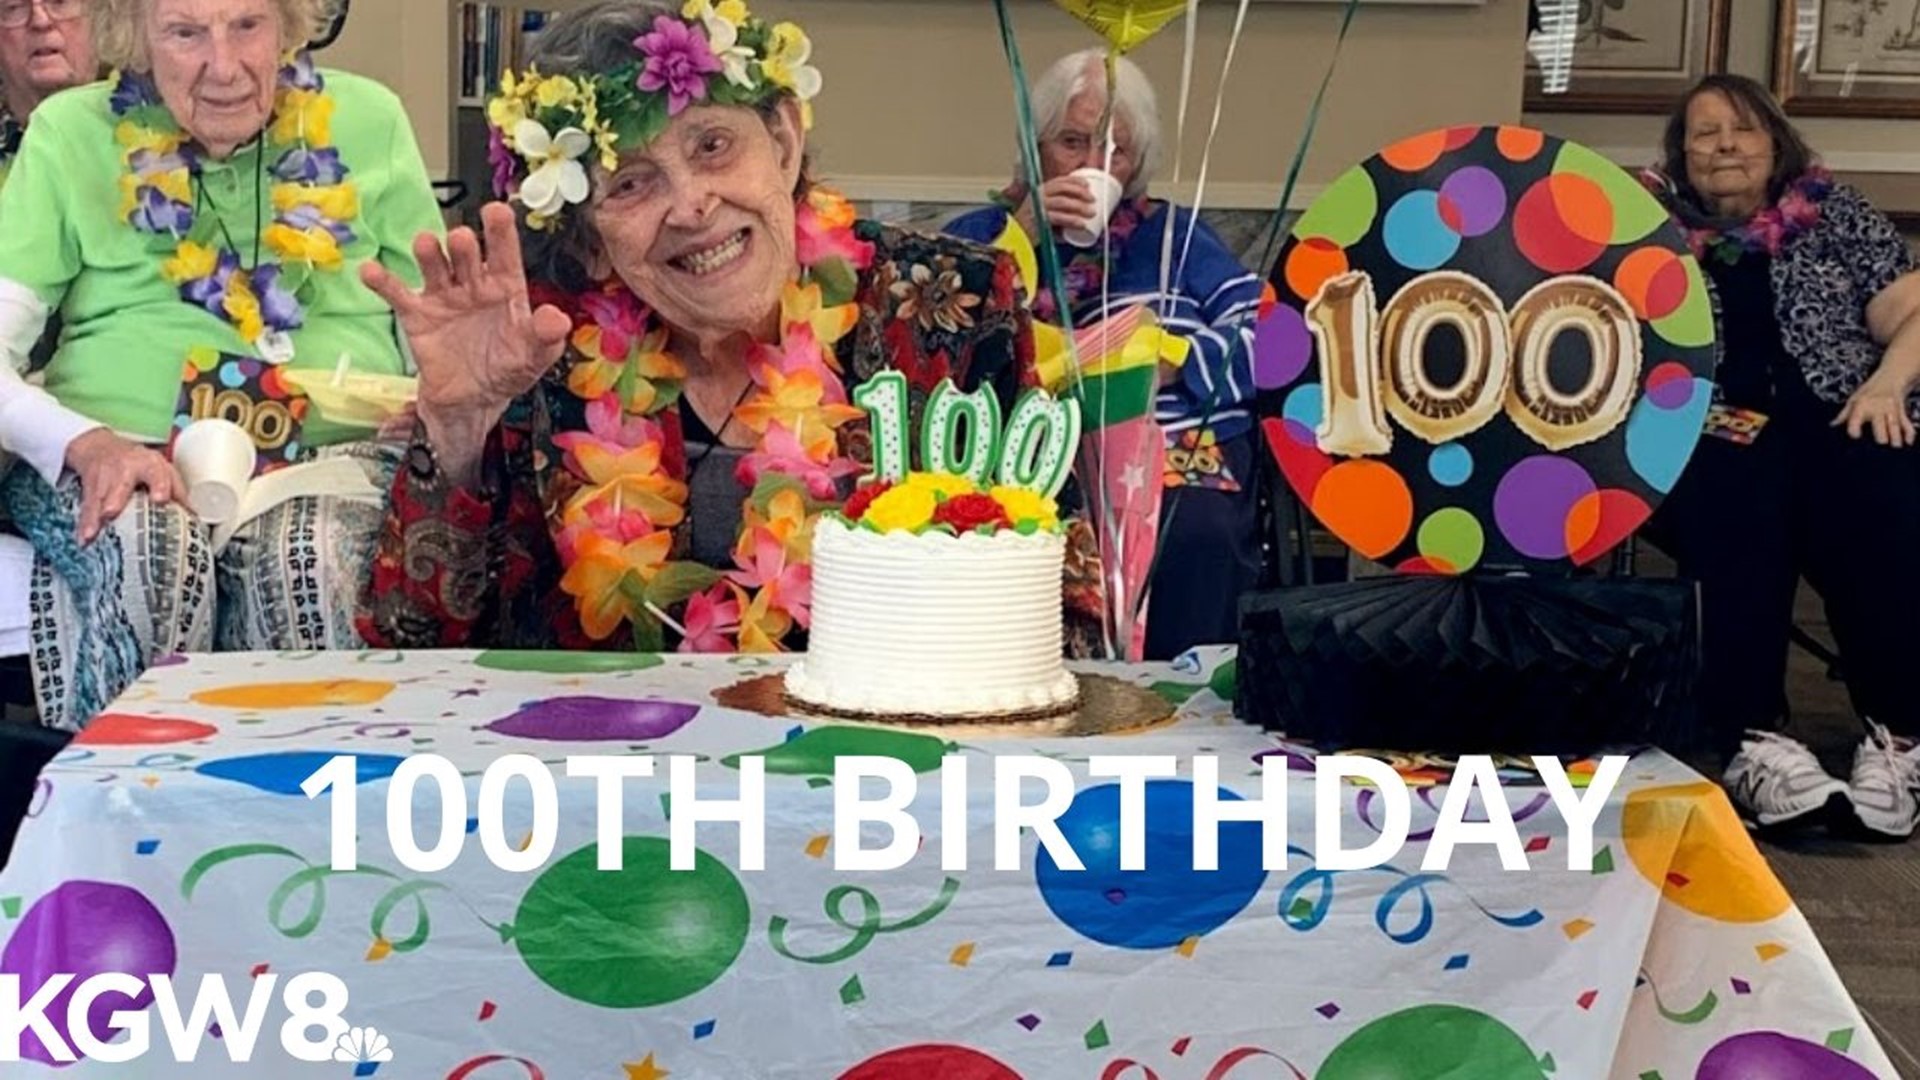 Eleanor Sterling, a Beaverton resident, turned 100 years old this Thursday. She has been living in Portland since 1993 and resides in Beaverton at living center.